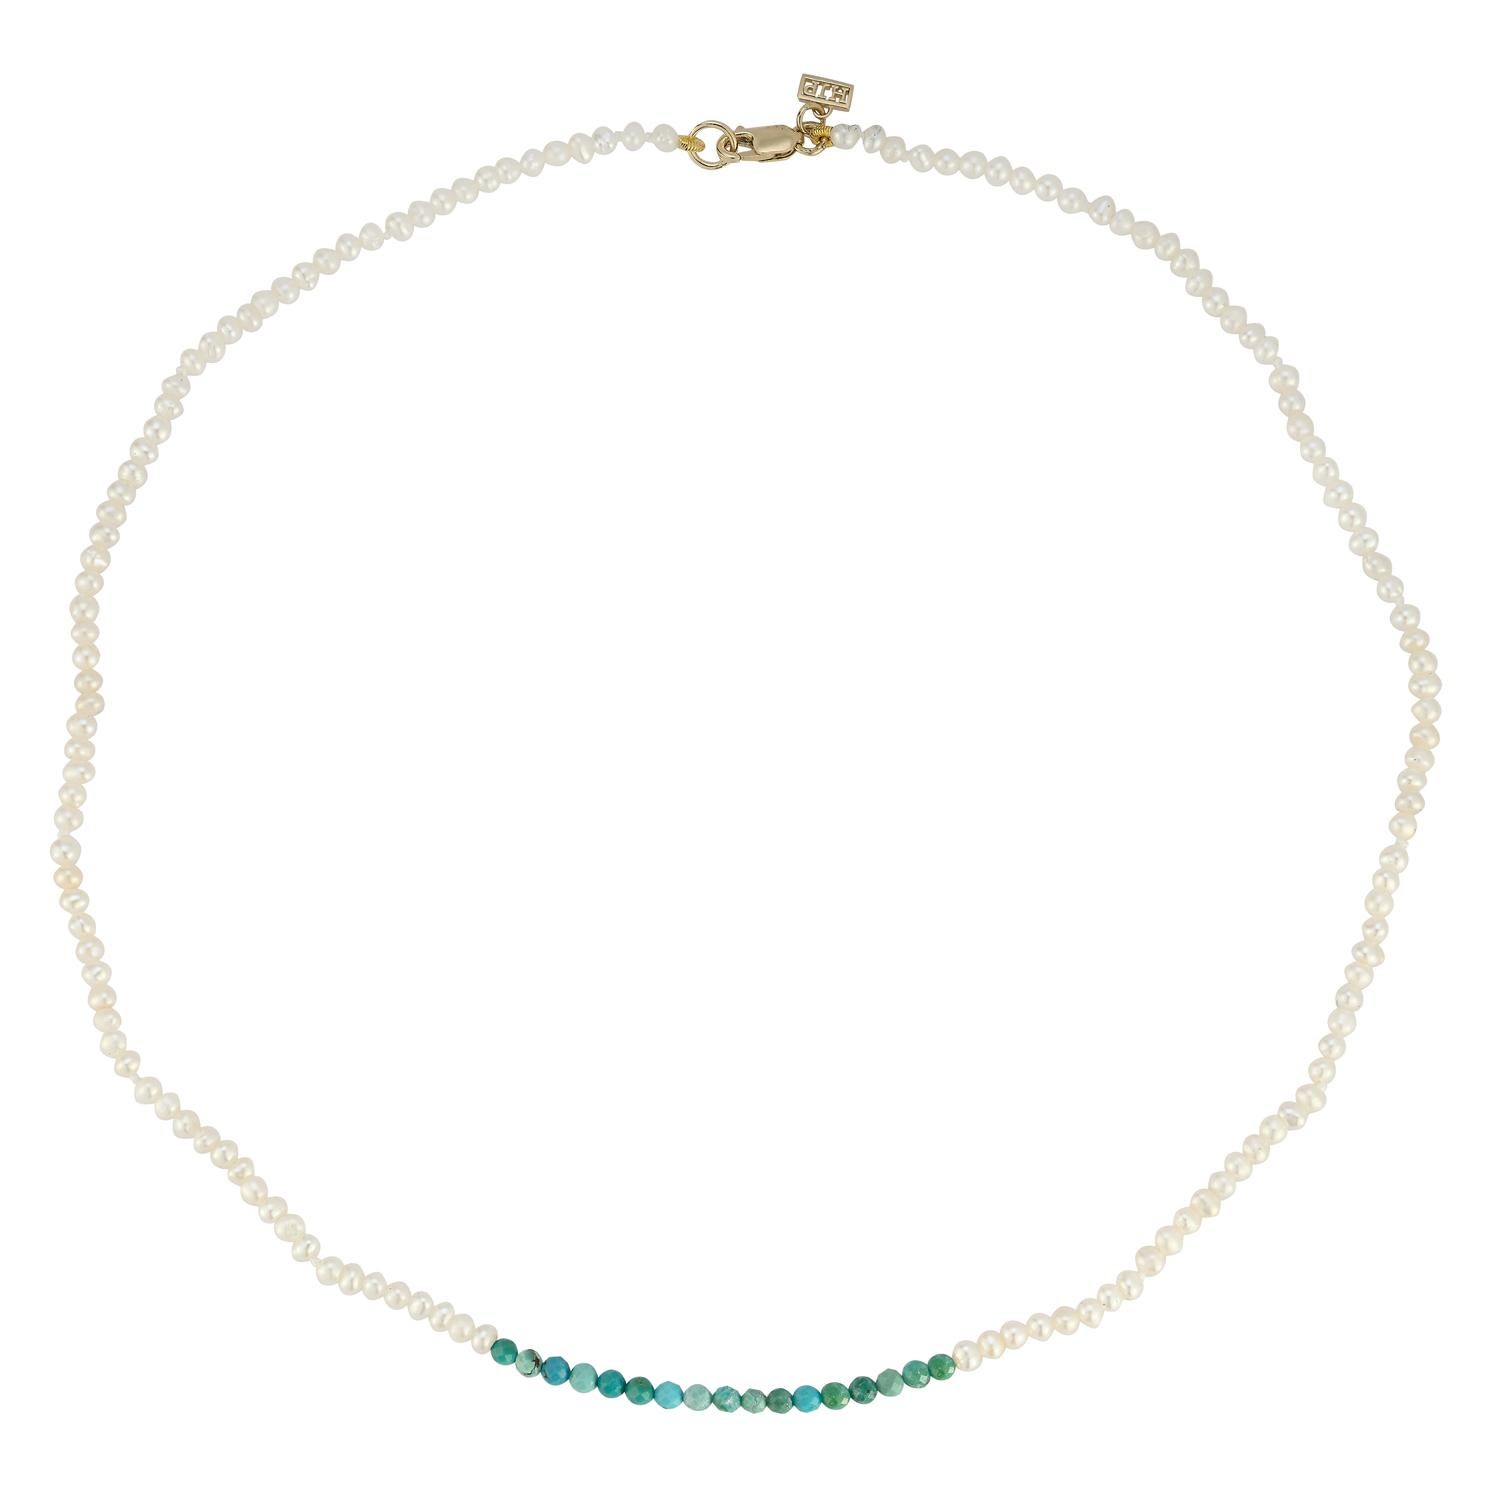 14 Karat Yellow Gold Seedpearl Choker with Turquoise Beads Hi June Parker For Sale